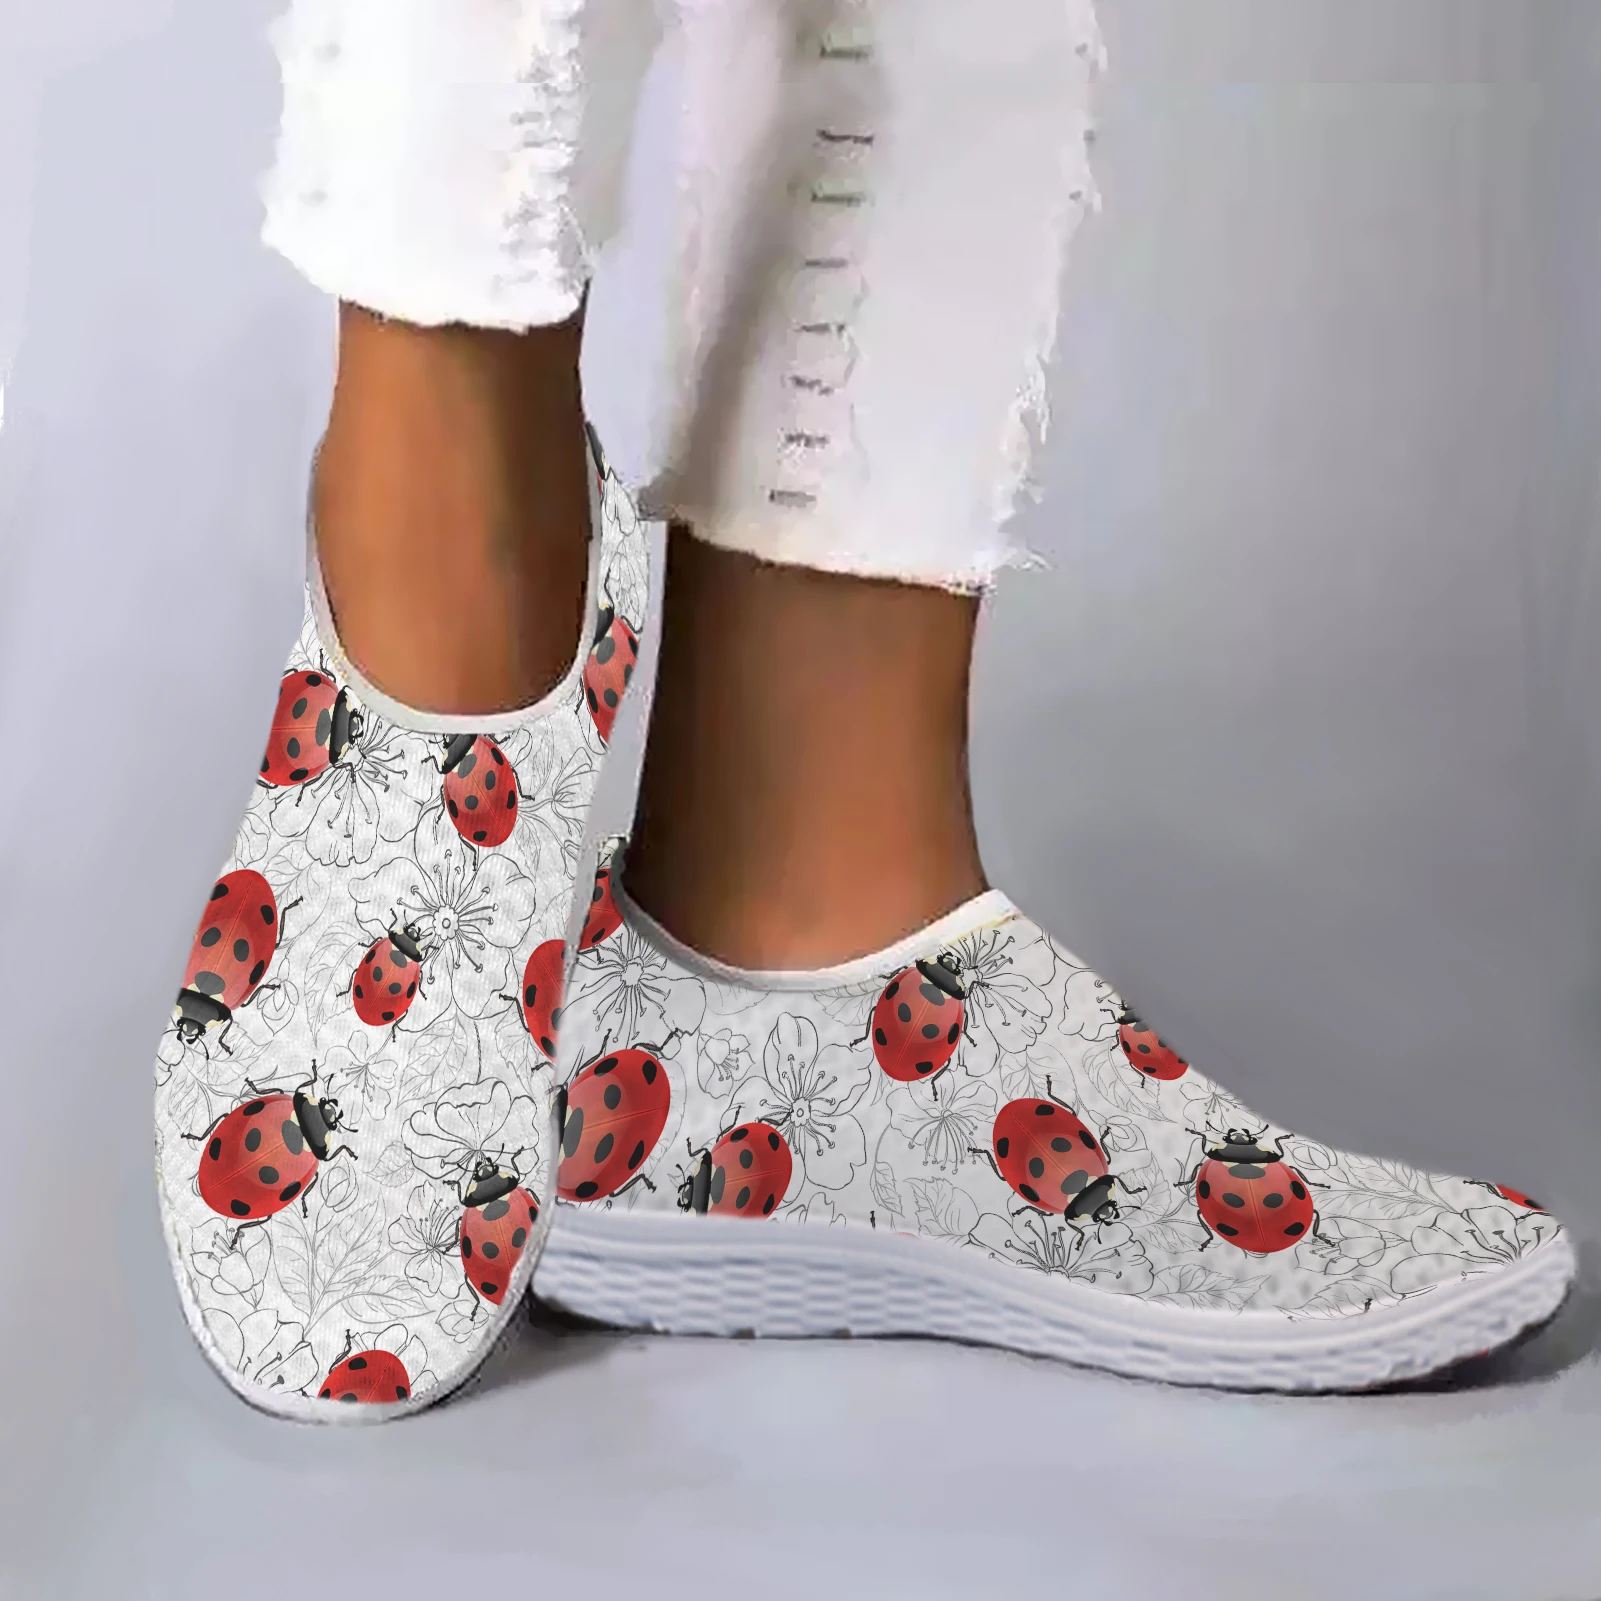 

INSTANTARTS White Lightweight Seven Star Ladybug Pattern Design Mesh Sneakers Comfort Slip On Shoes Soft Leisure Shoes Zapatos